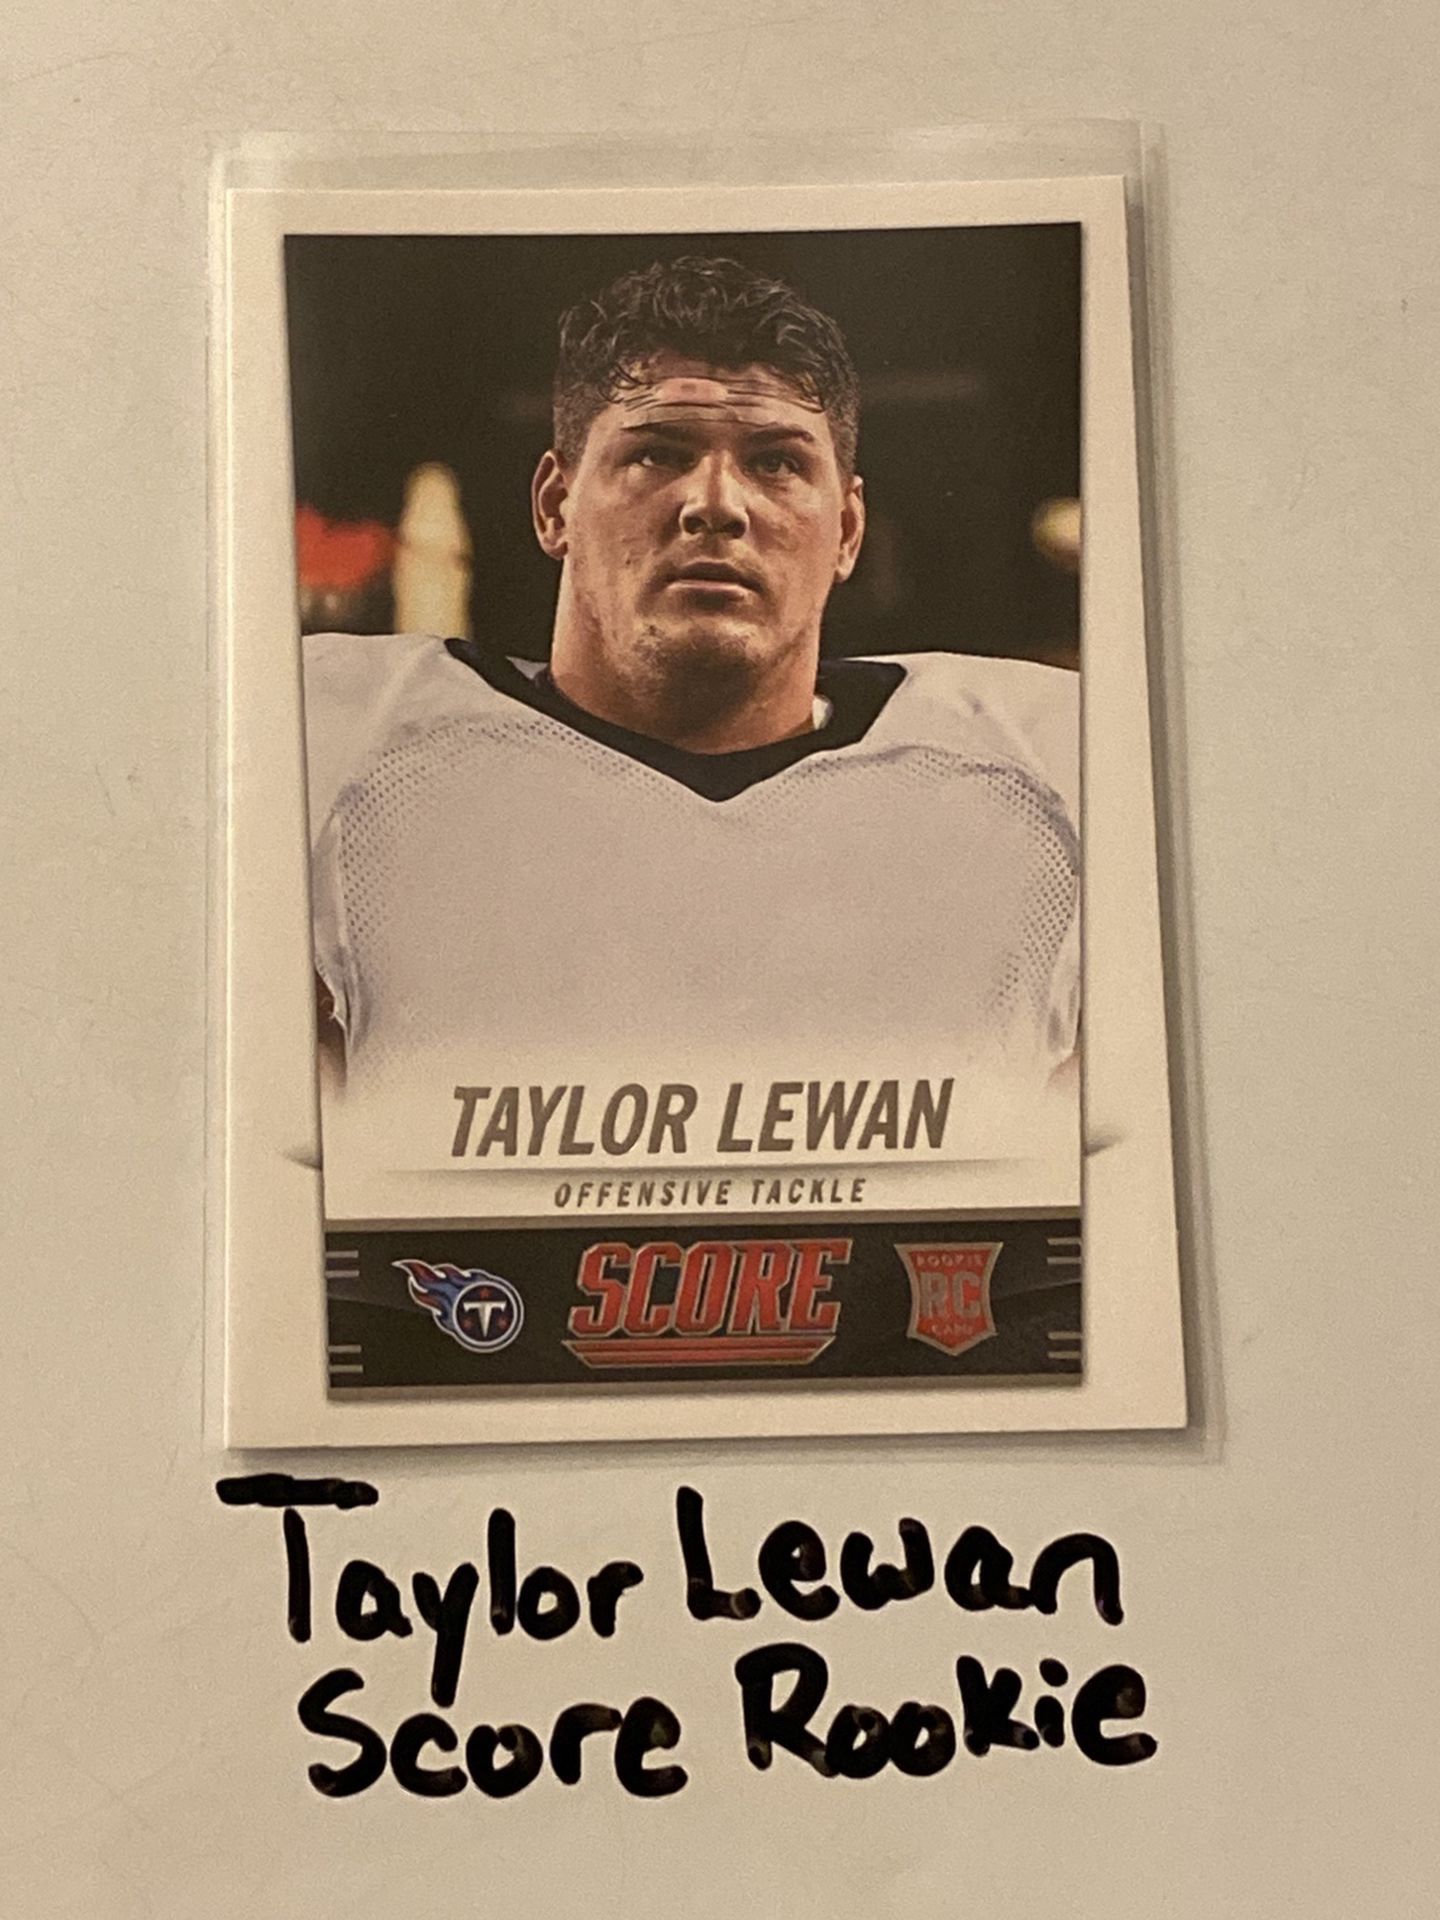 Taylor Lewan Tennessee Titans All Pro Tackle Score Rookie Card.